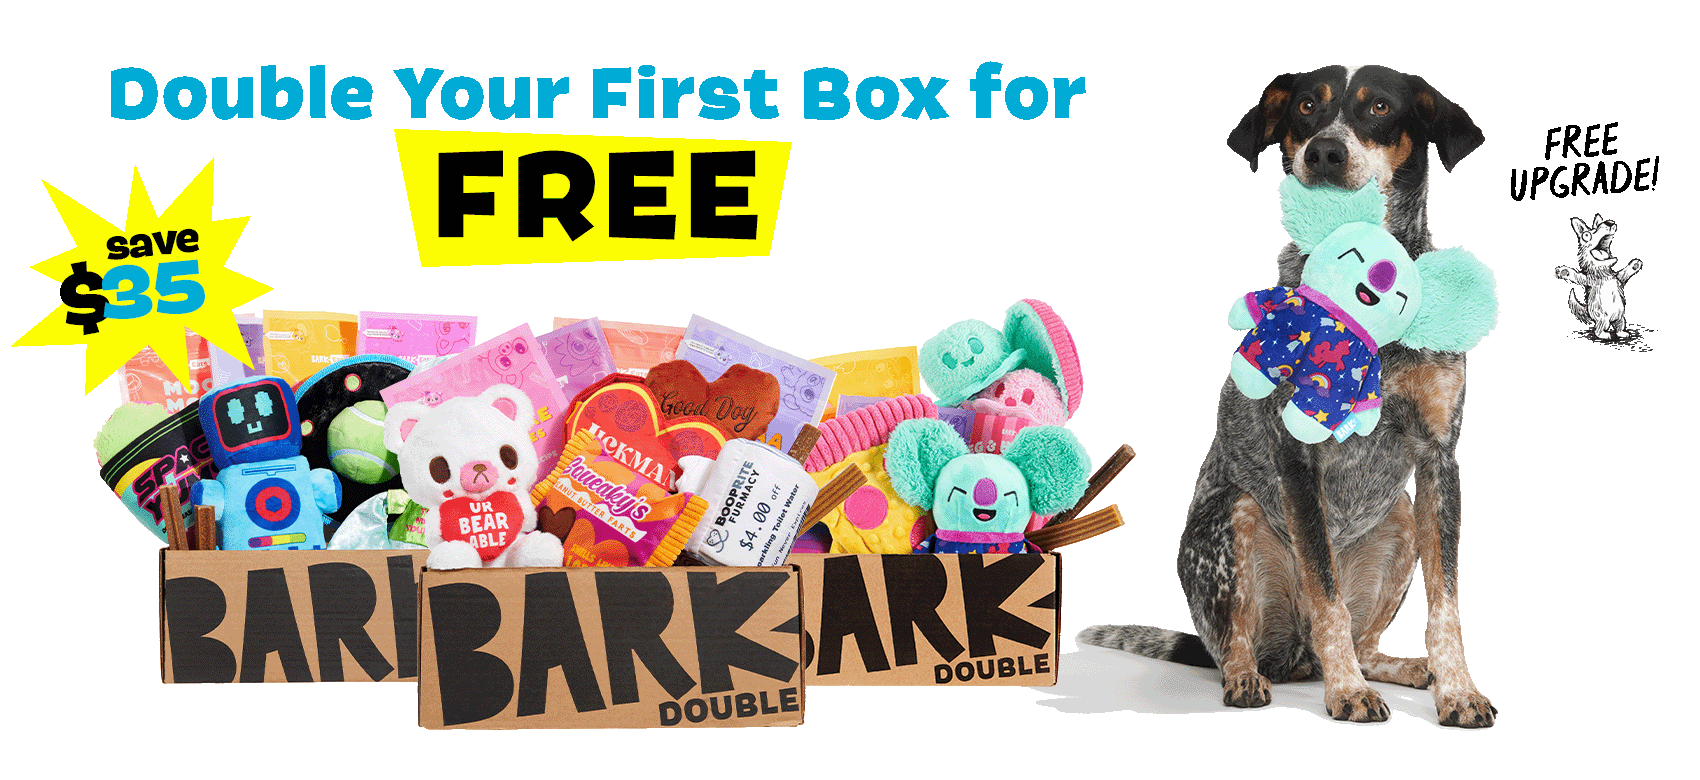 Double Your First Box for FREE - save $35 - FREE UPGRADE!